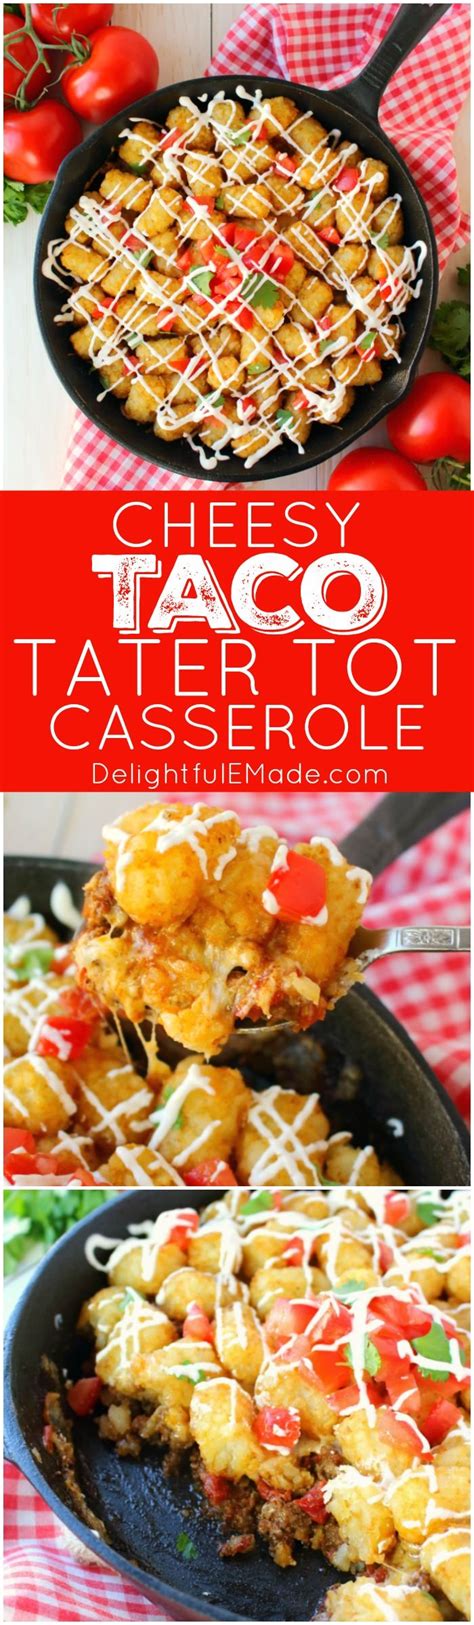 From scratch and replaced the tater tots with cauliflower tots. If you love the classic Tater Tot Casserole, this cheesy ...